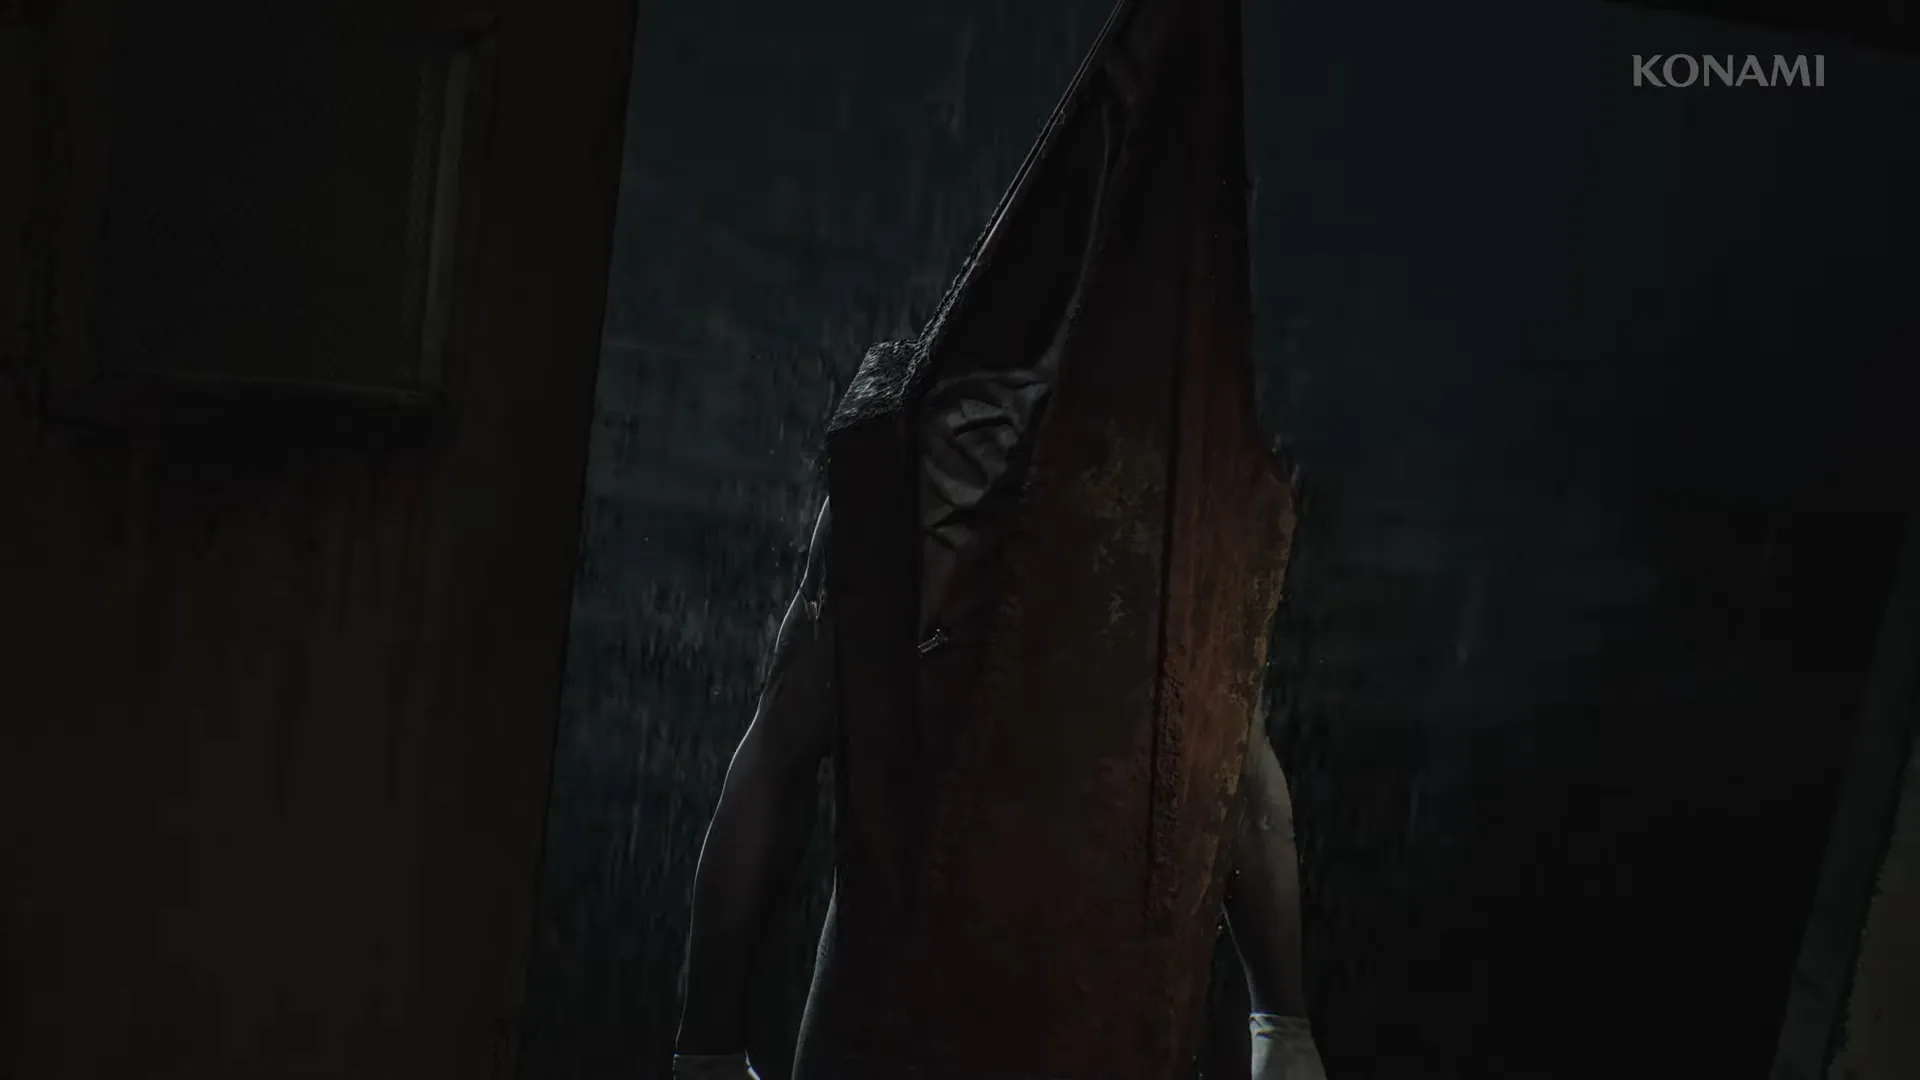 Silent Hill 2 is getting a remake courtesy of Bloober Team